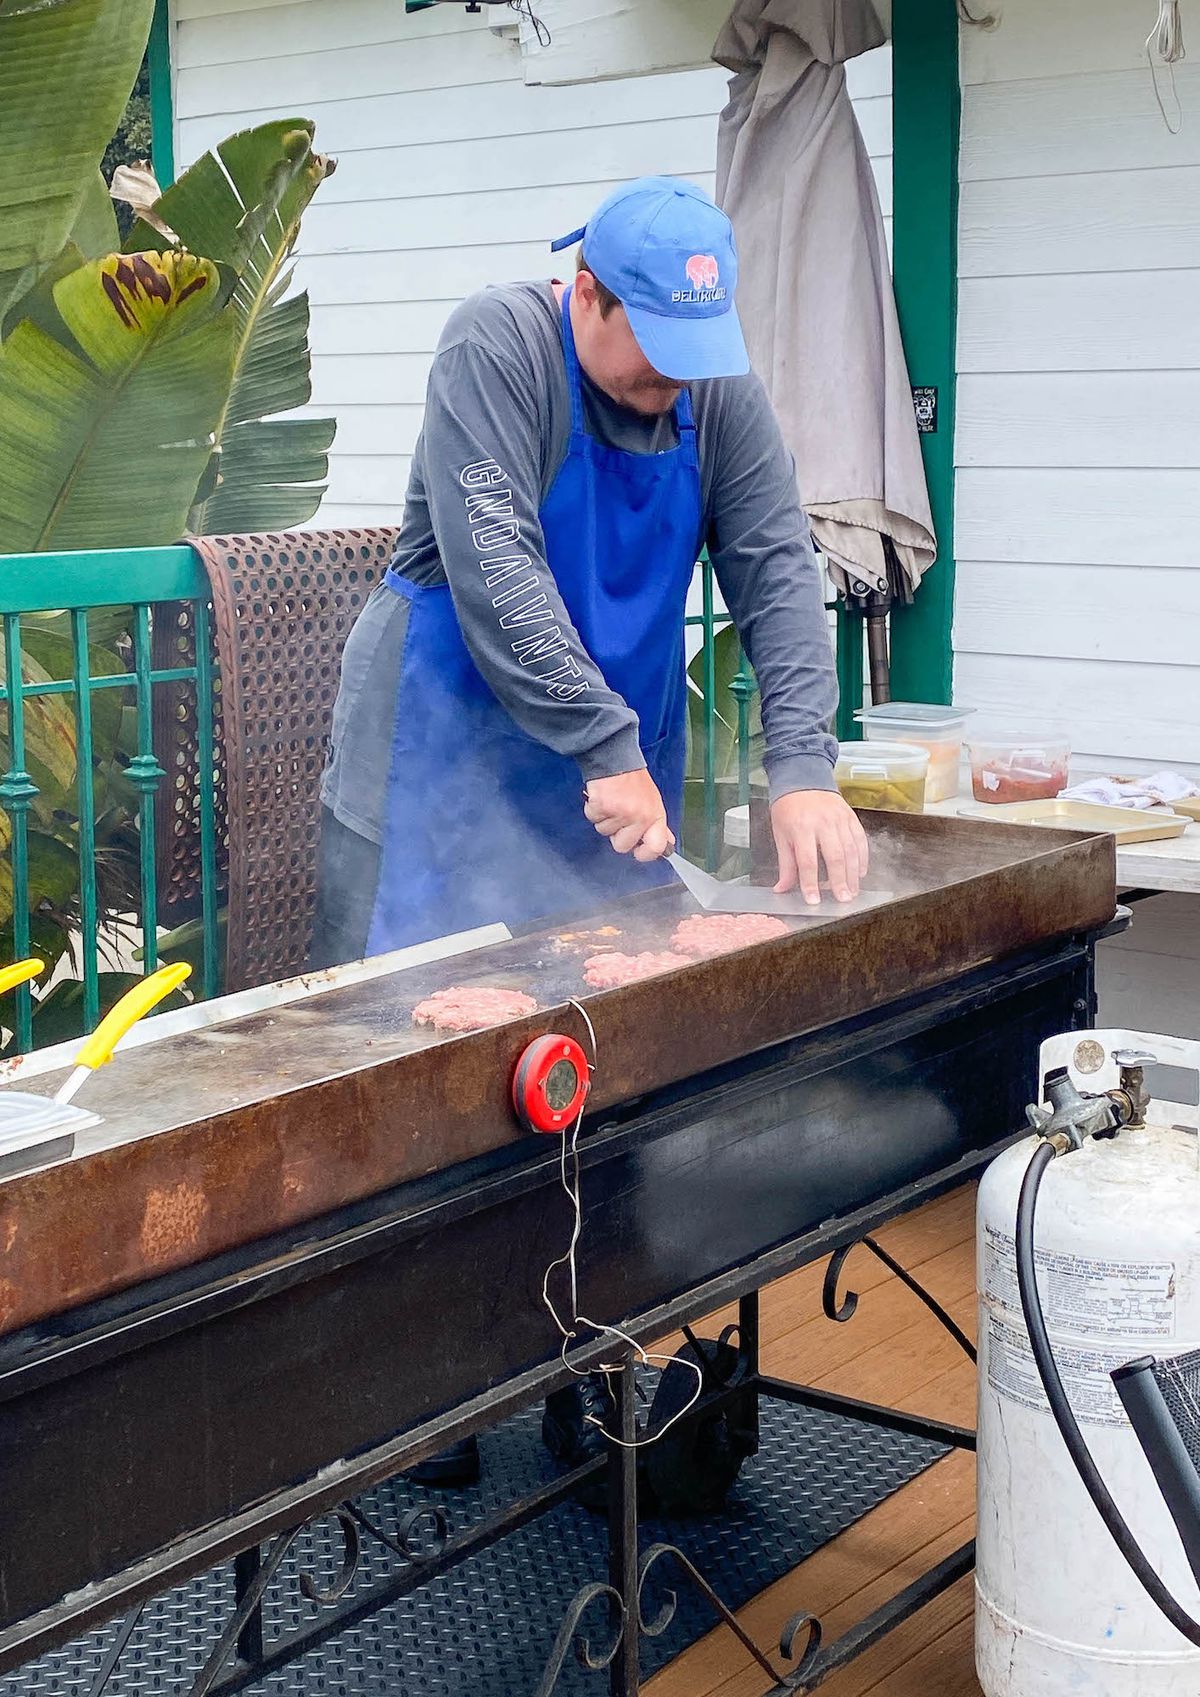 A man in blue hat and apron presses on a beef patty on a griddle.